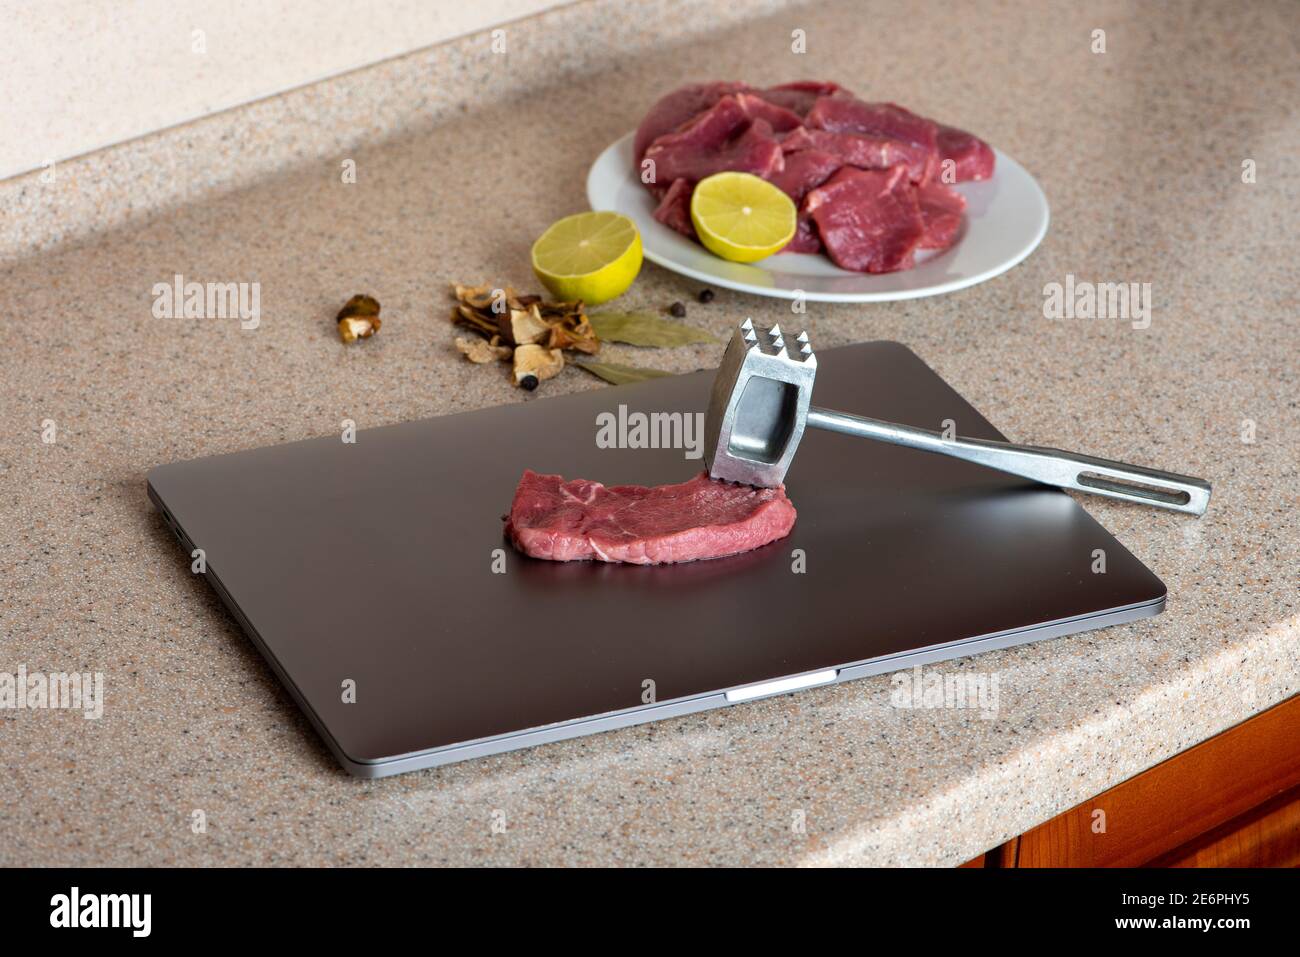 Computer is used as a kitchen board. Meat on laptop is ready to beat with tenderizer. Computer hating or testing. Stock Photo